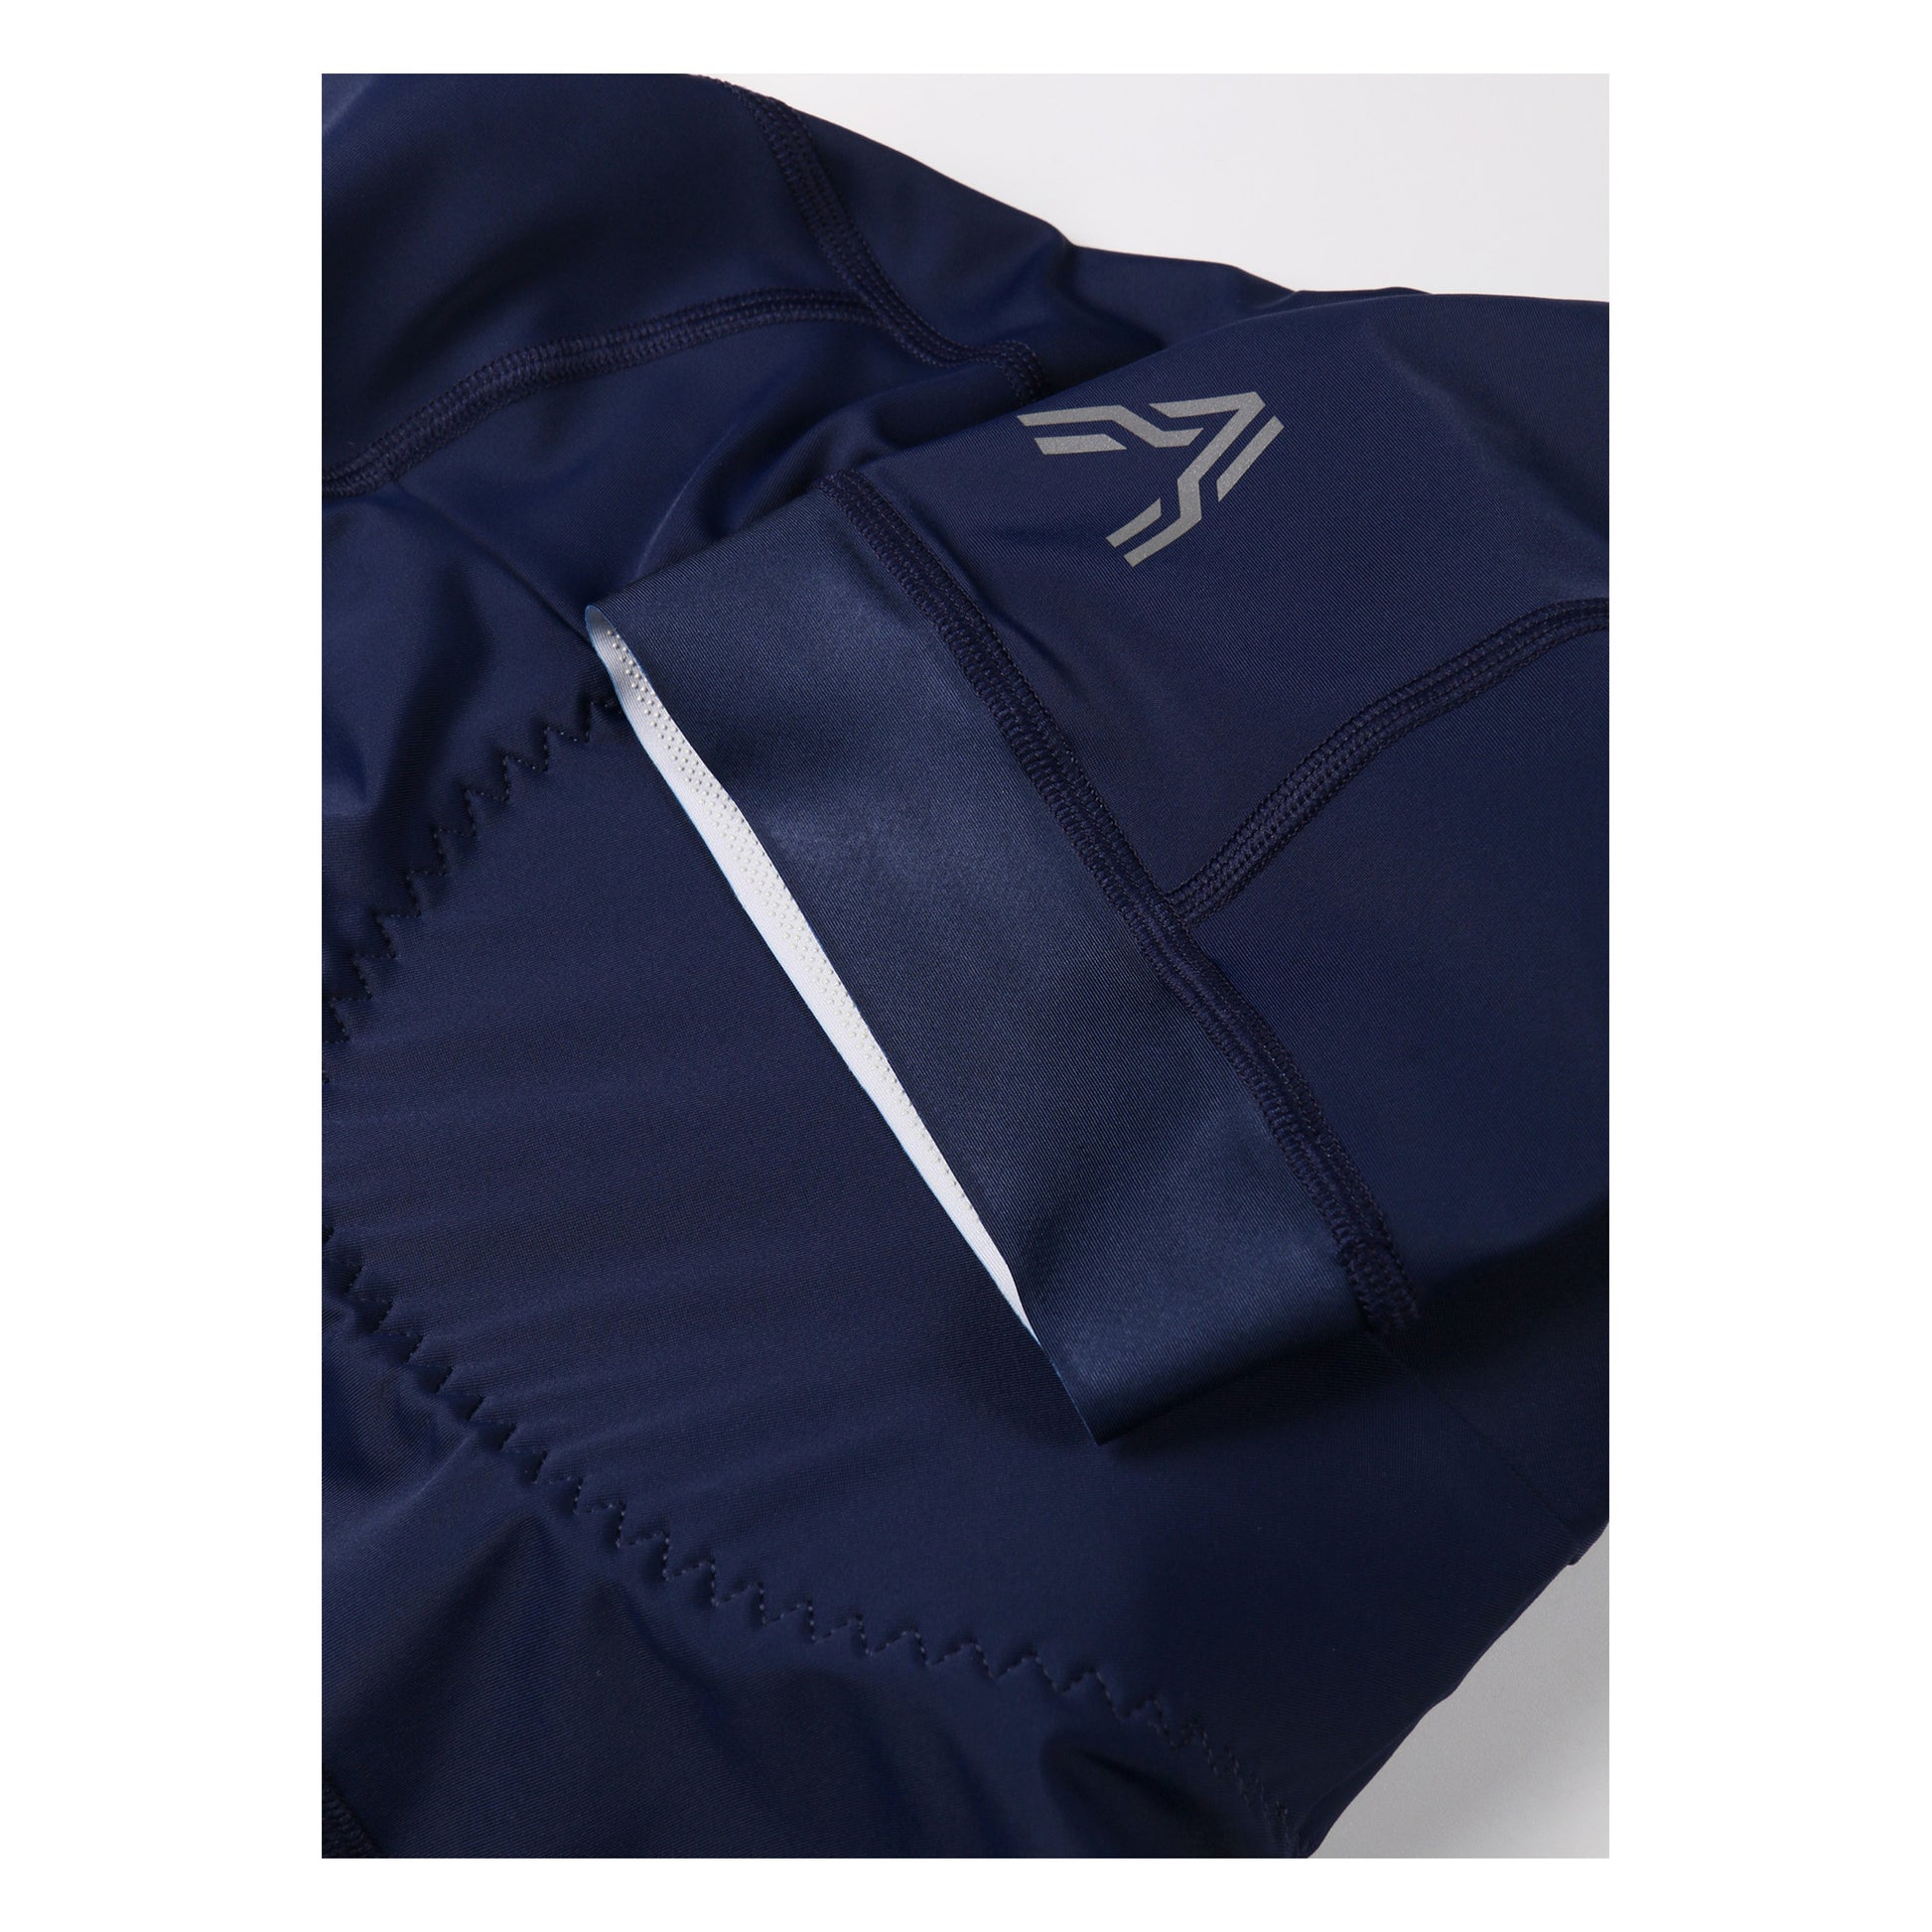 Epona Women Bib Short Navy by Ascender Cycling Club Zürich in Switzerland Front Left with Reflective Logos Ascender Monogram in Detailled View and Silicone Injected Grippers